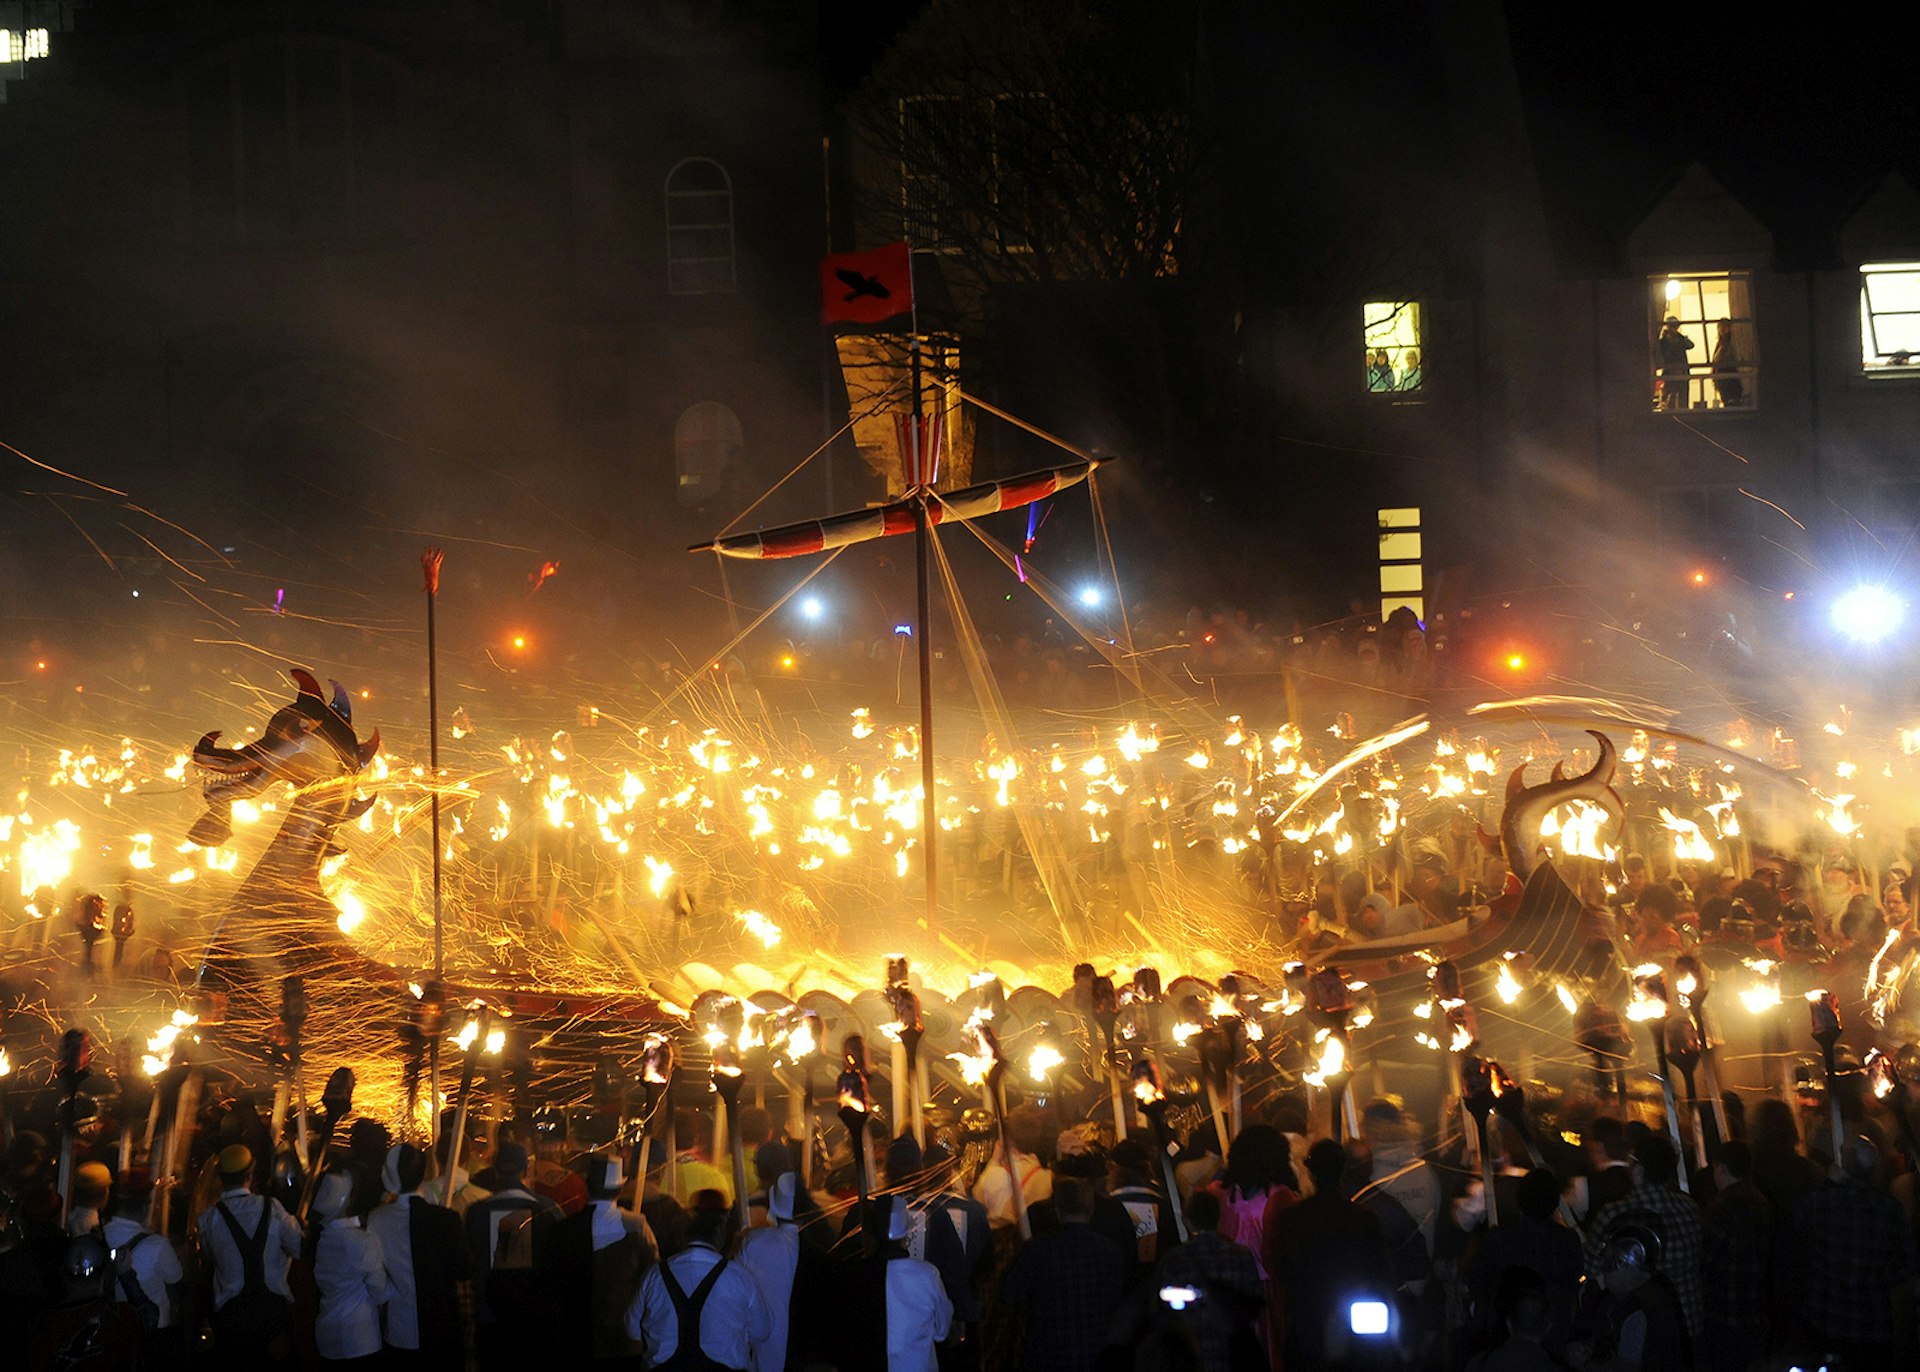 A crowd gathered around a burning Viking longship at Shetland's Up Helly Aa festival © Andy Buchanan / Getty Images